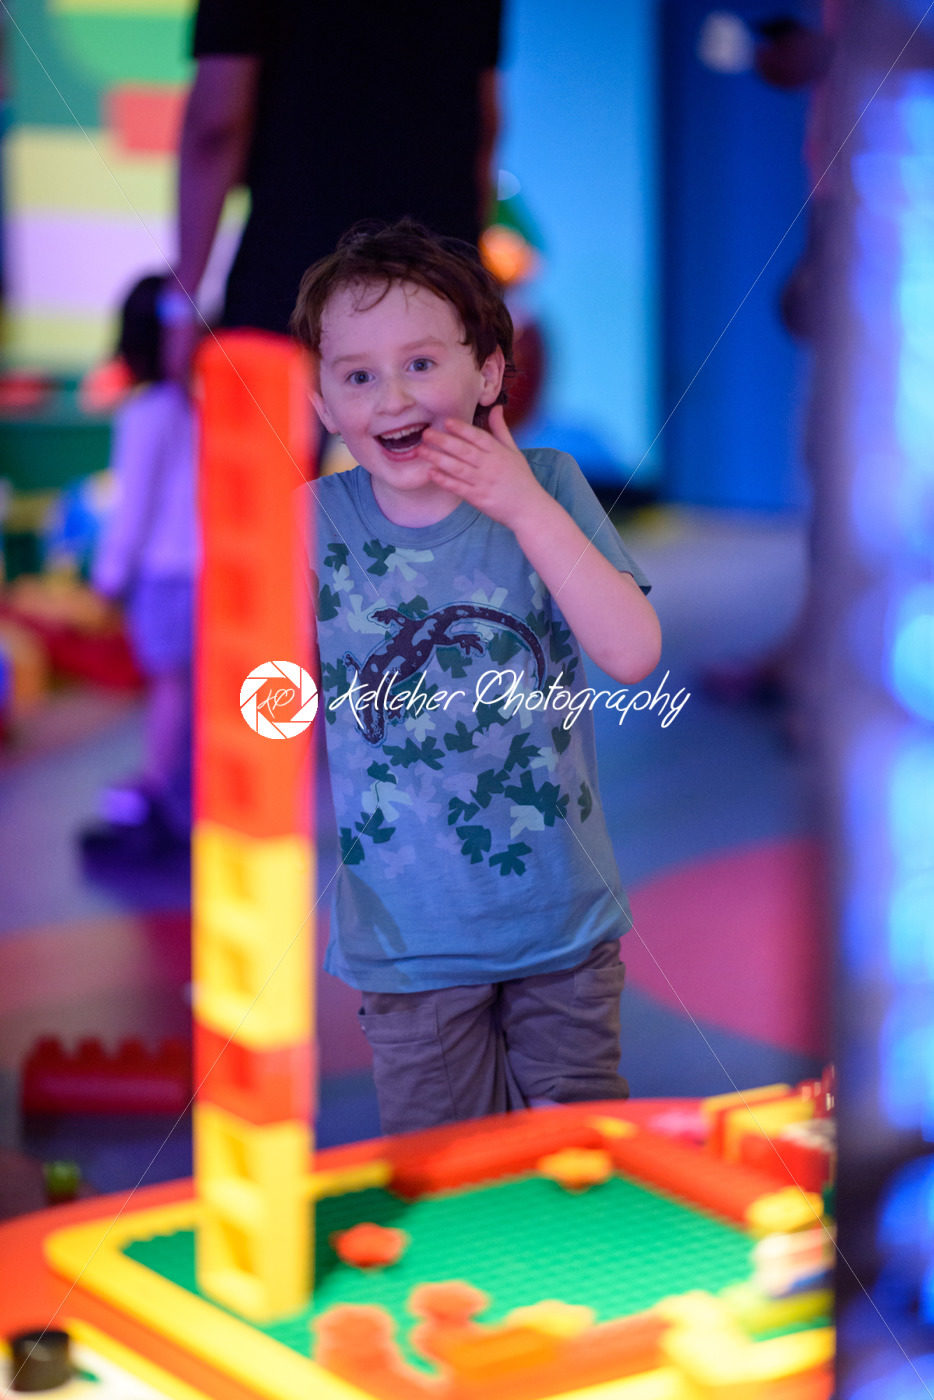 PLYMOUTH MEETING, PA – APRIL 6: Grand Opening of Legoland Discovery center Philadelphia, PA on April 6, 2017 - Kelleher Photography Store